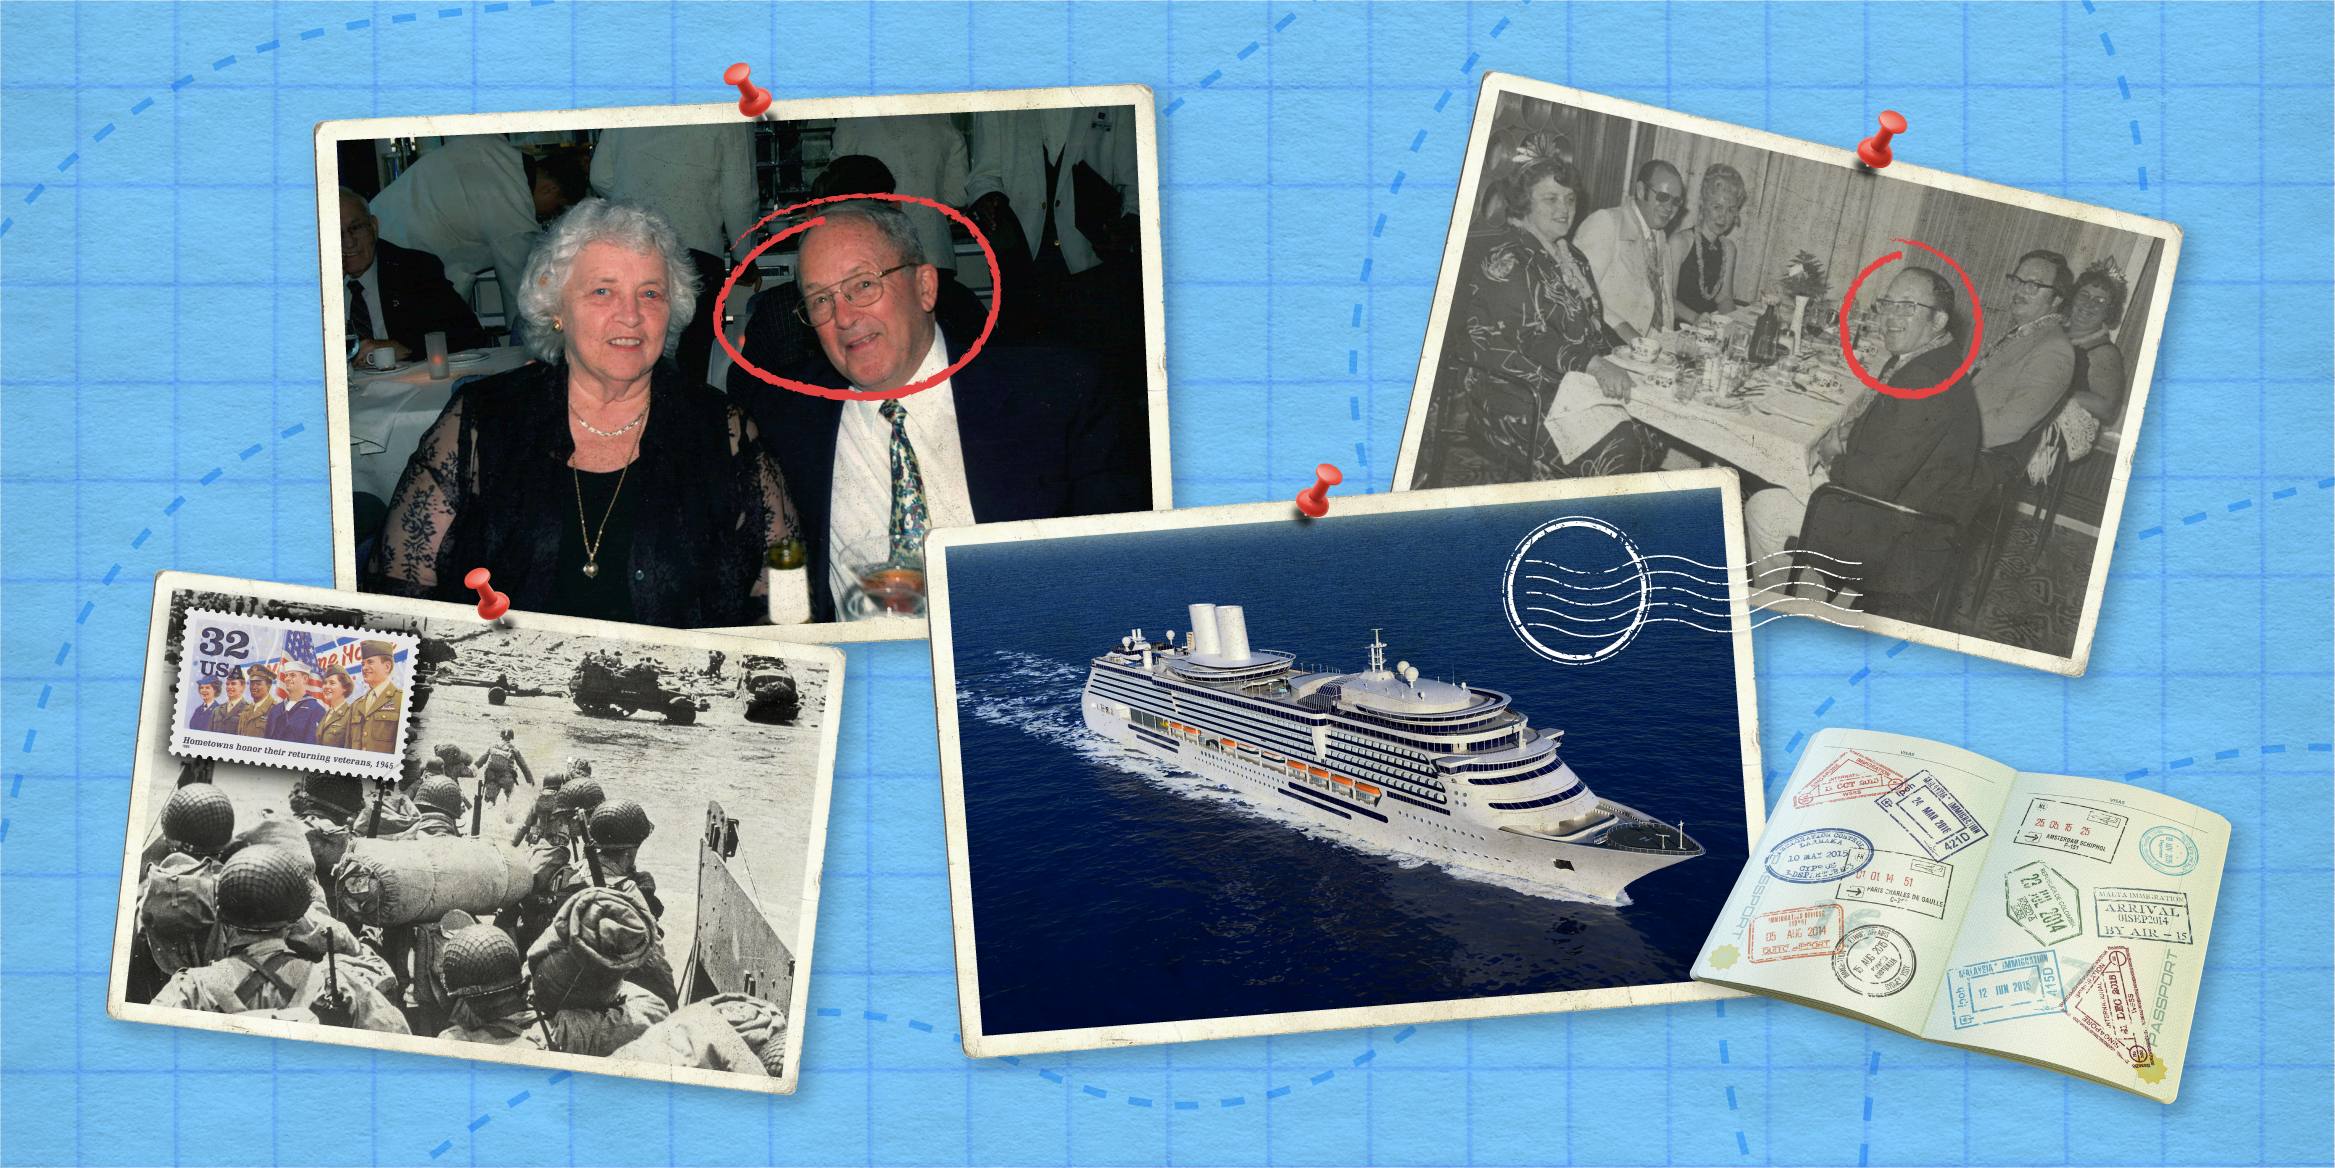 Collage of photos, including images from the author, a cruise ship, and WWII photo 2x1